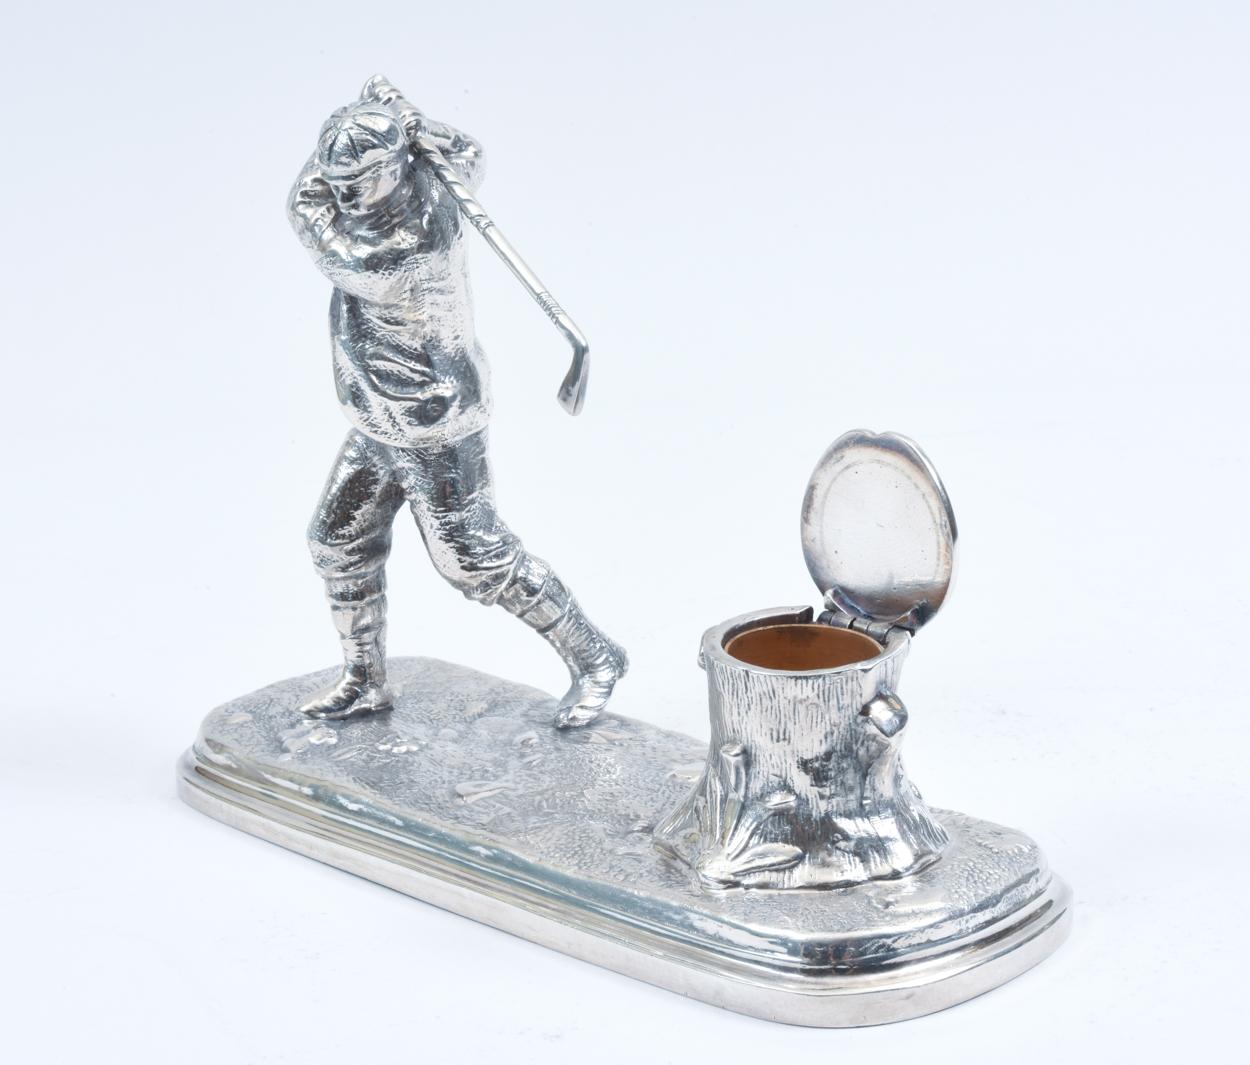 English Sheffield Silver Plated Inkwell with Golfer Design Details 2